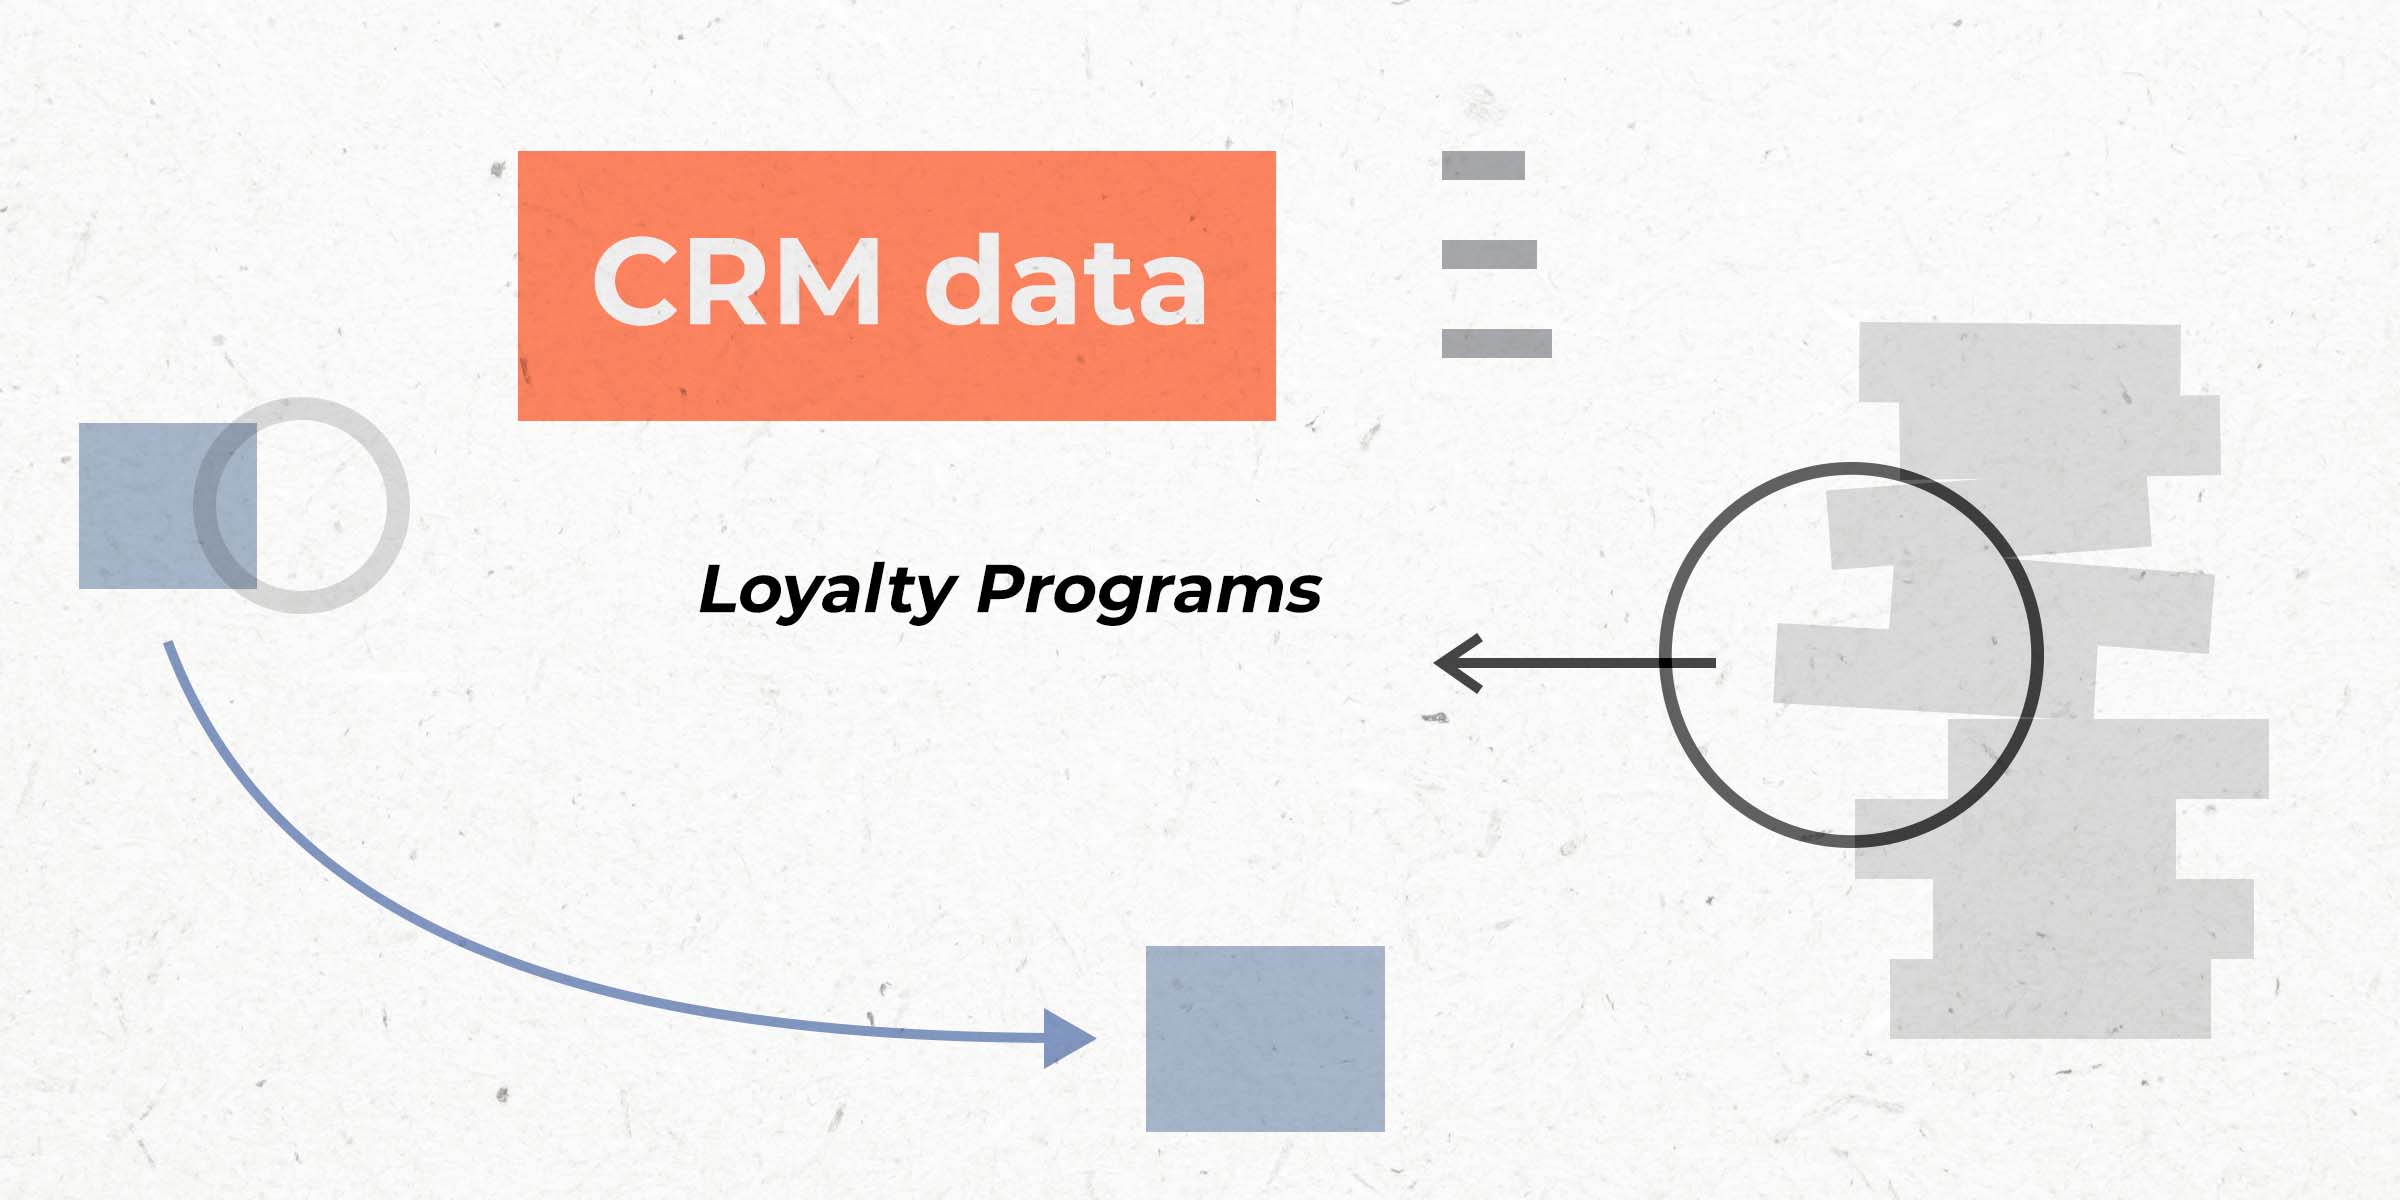 How to Increase Customer LTV by Syncing Loyalty Data Into Your CRM Marketing